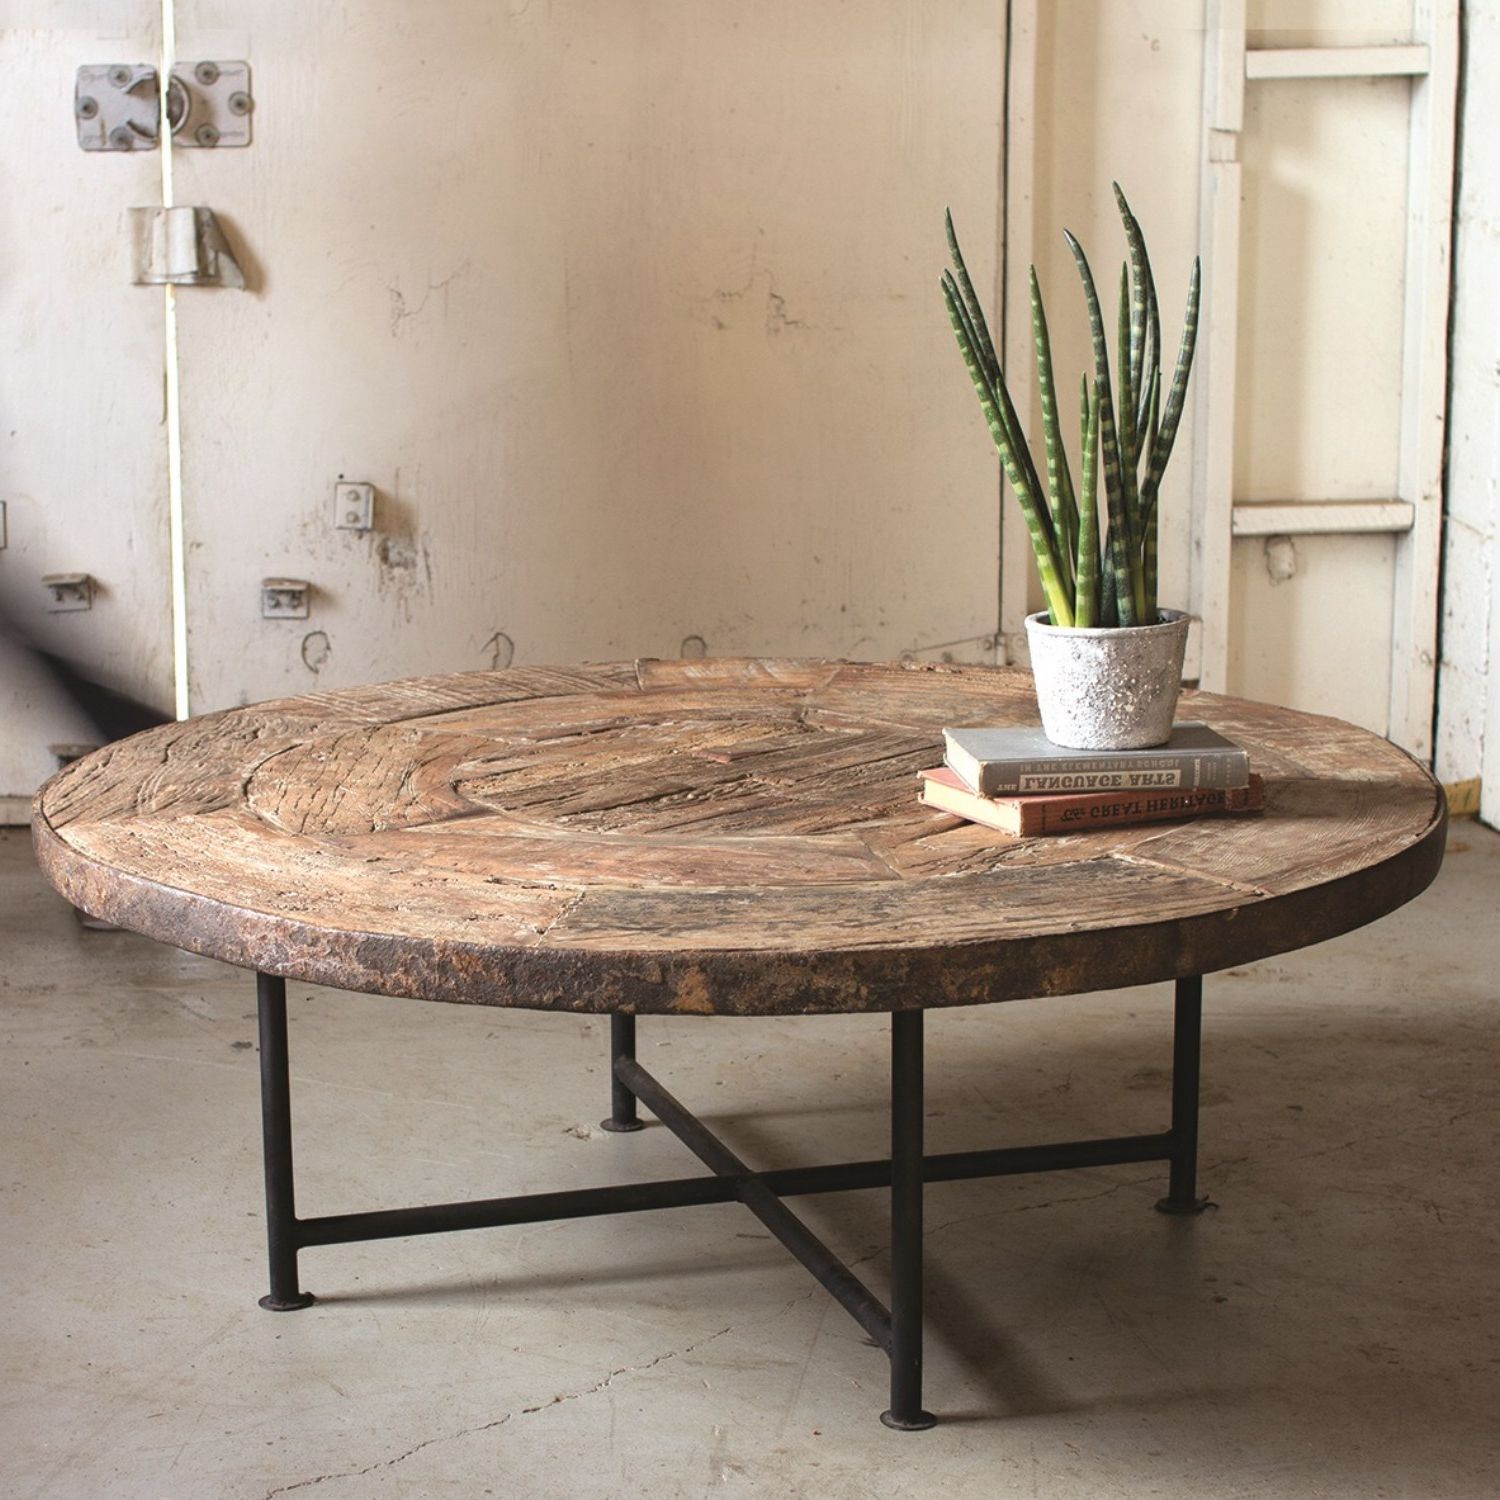 Round Coffee Table From Recycled Vintage Wood Wagon Wheel Designer Inside Well Liked Round Iron Coffee Tables (View 7 of 10)